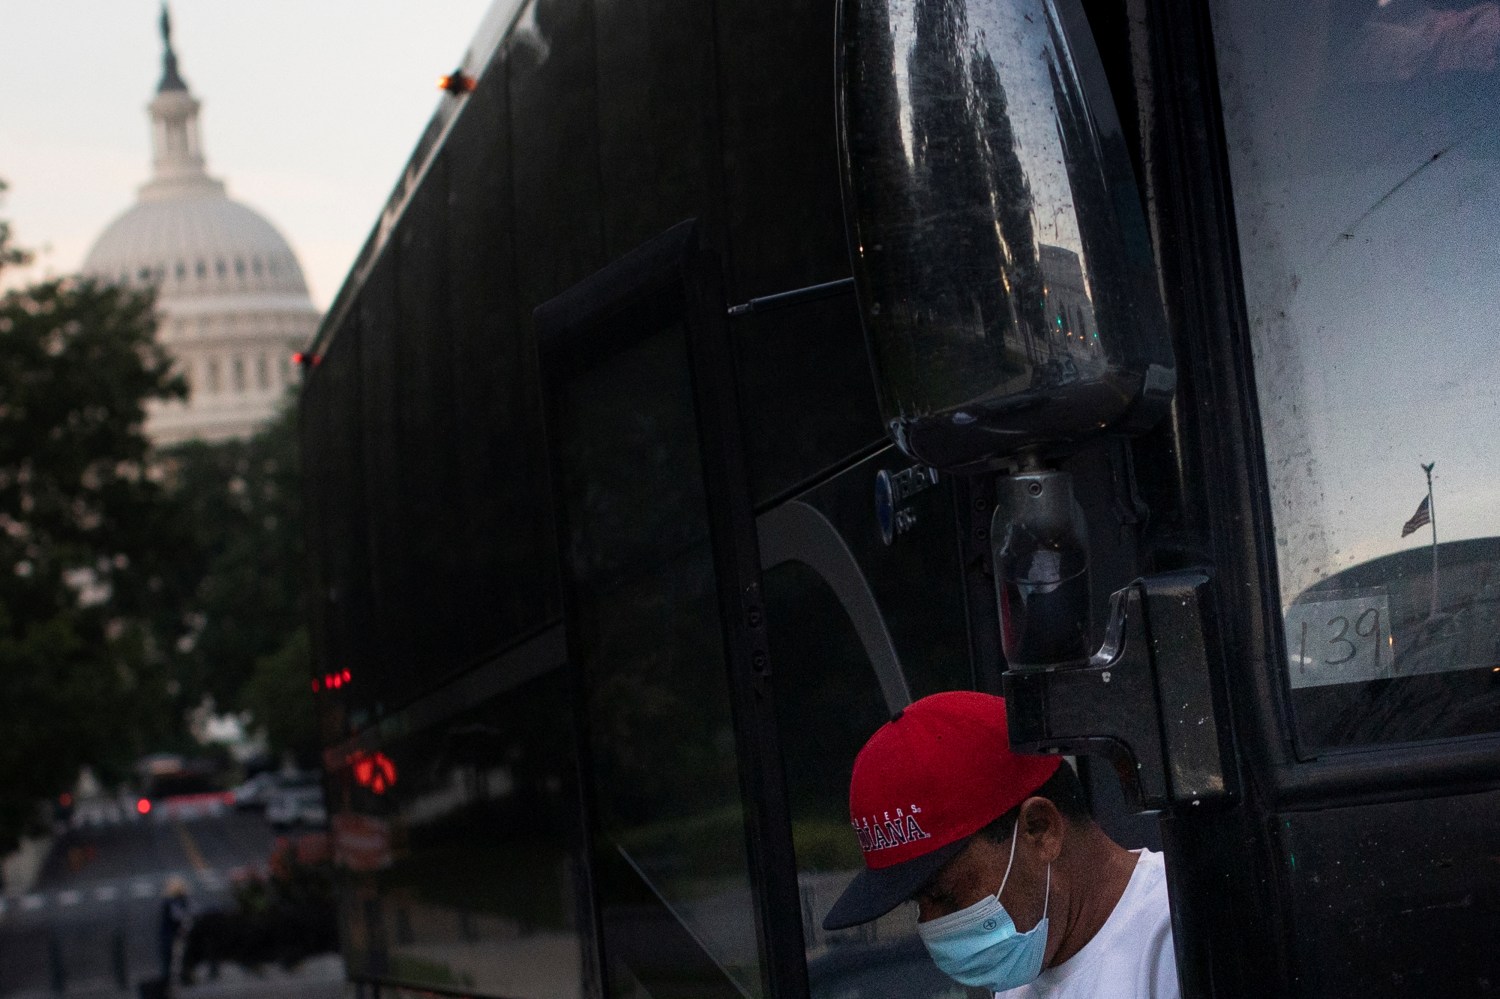 A migrant exits a bus during early morning hours following a travel from Texas, outside the U.S. Capitol in Washington, U.S., July 30, 2022. REUTERS/Tom Brenner